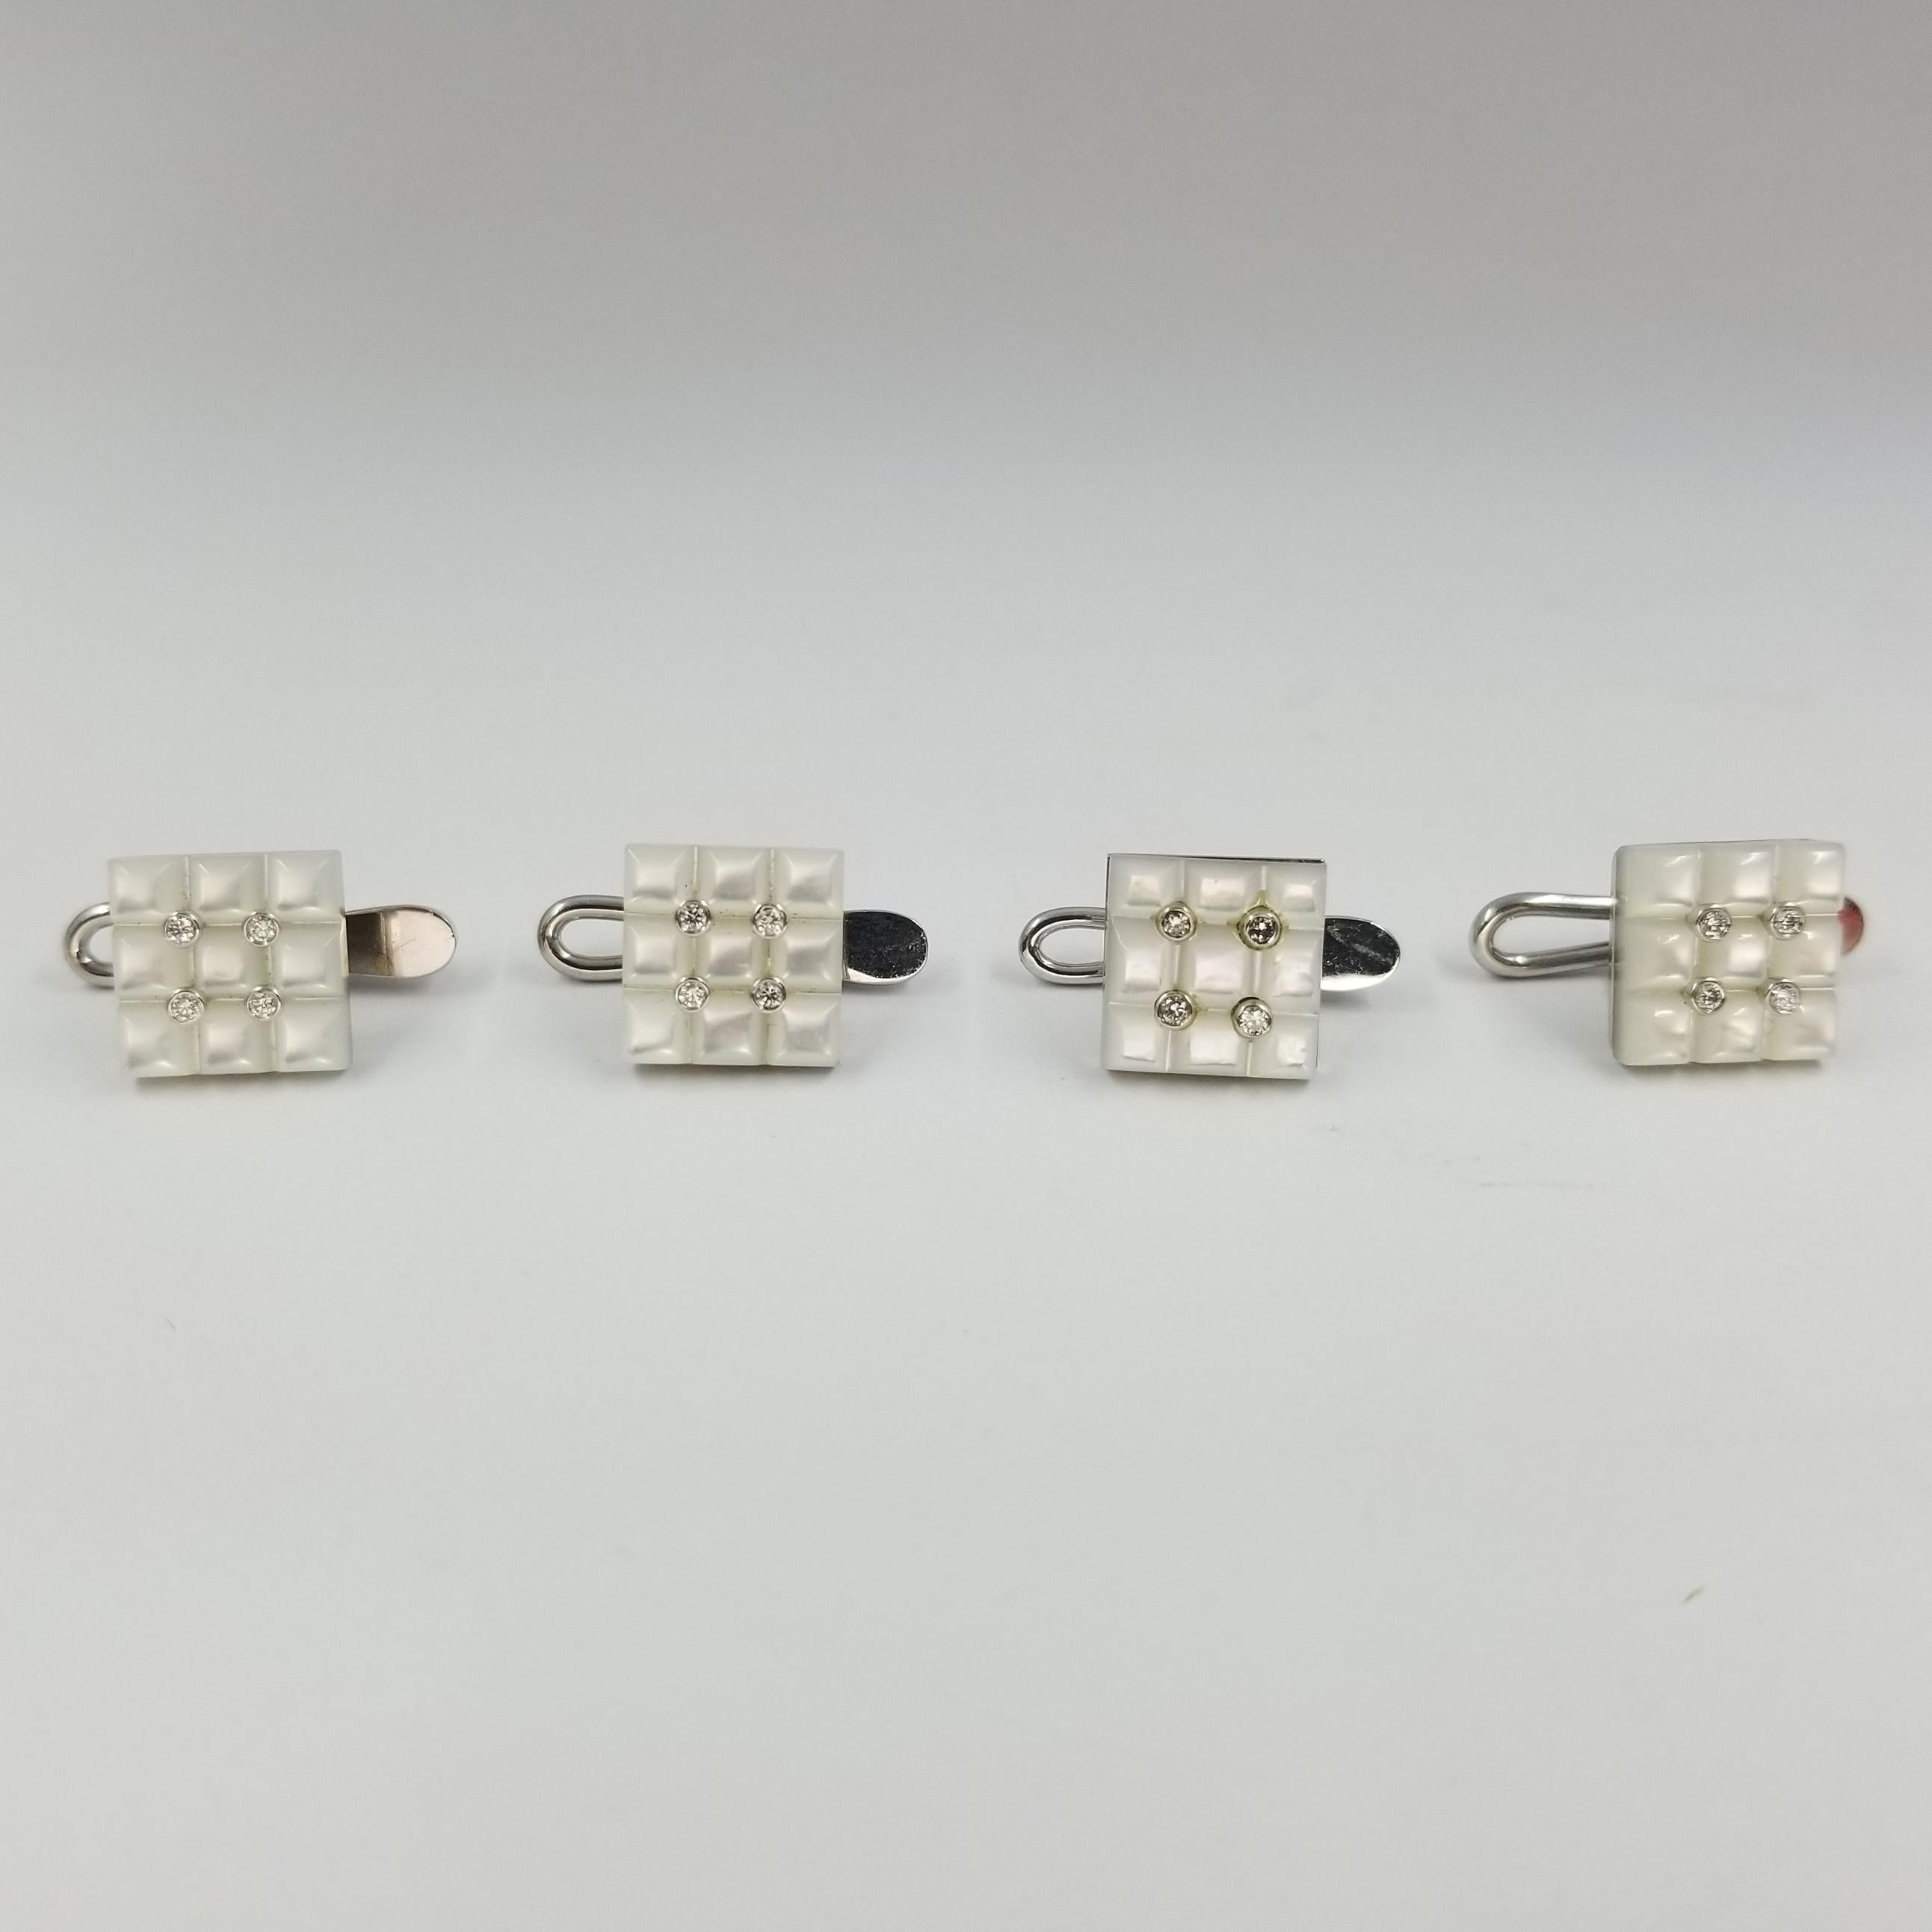 Set of 4 Tuxedo Shirt Studs crafted in 18 karat white gold (stamped 750), carved mother of pearl, and bezel set diamonds. 16 round diamonds of VS clarity & G color total approximately 0.16cttw. Hinged backs for easy dressing and removal.